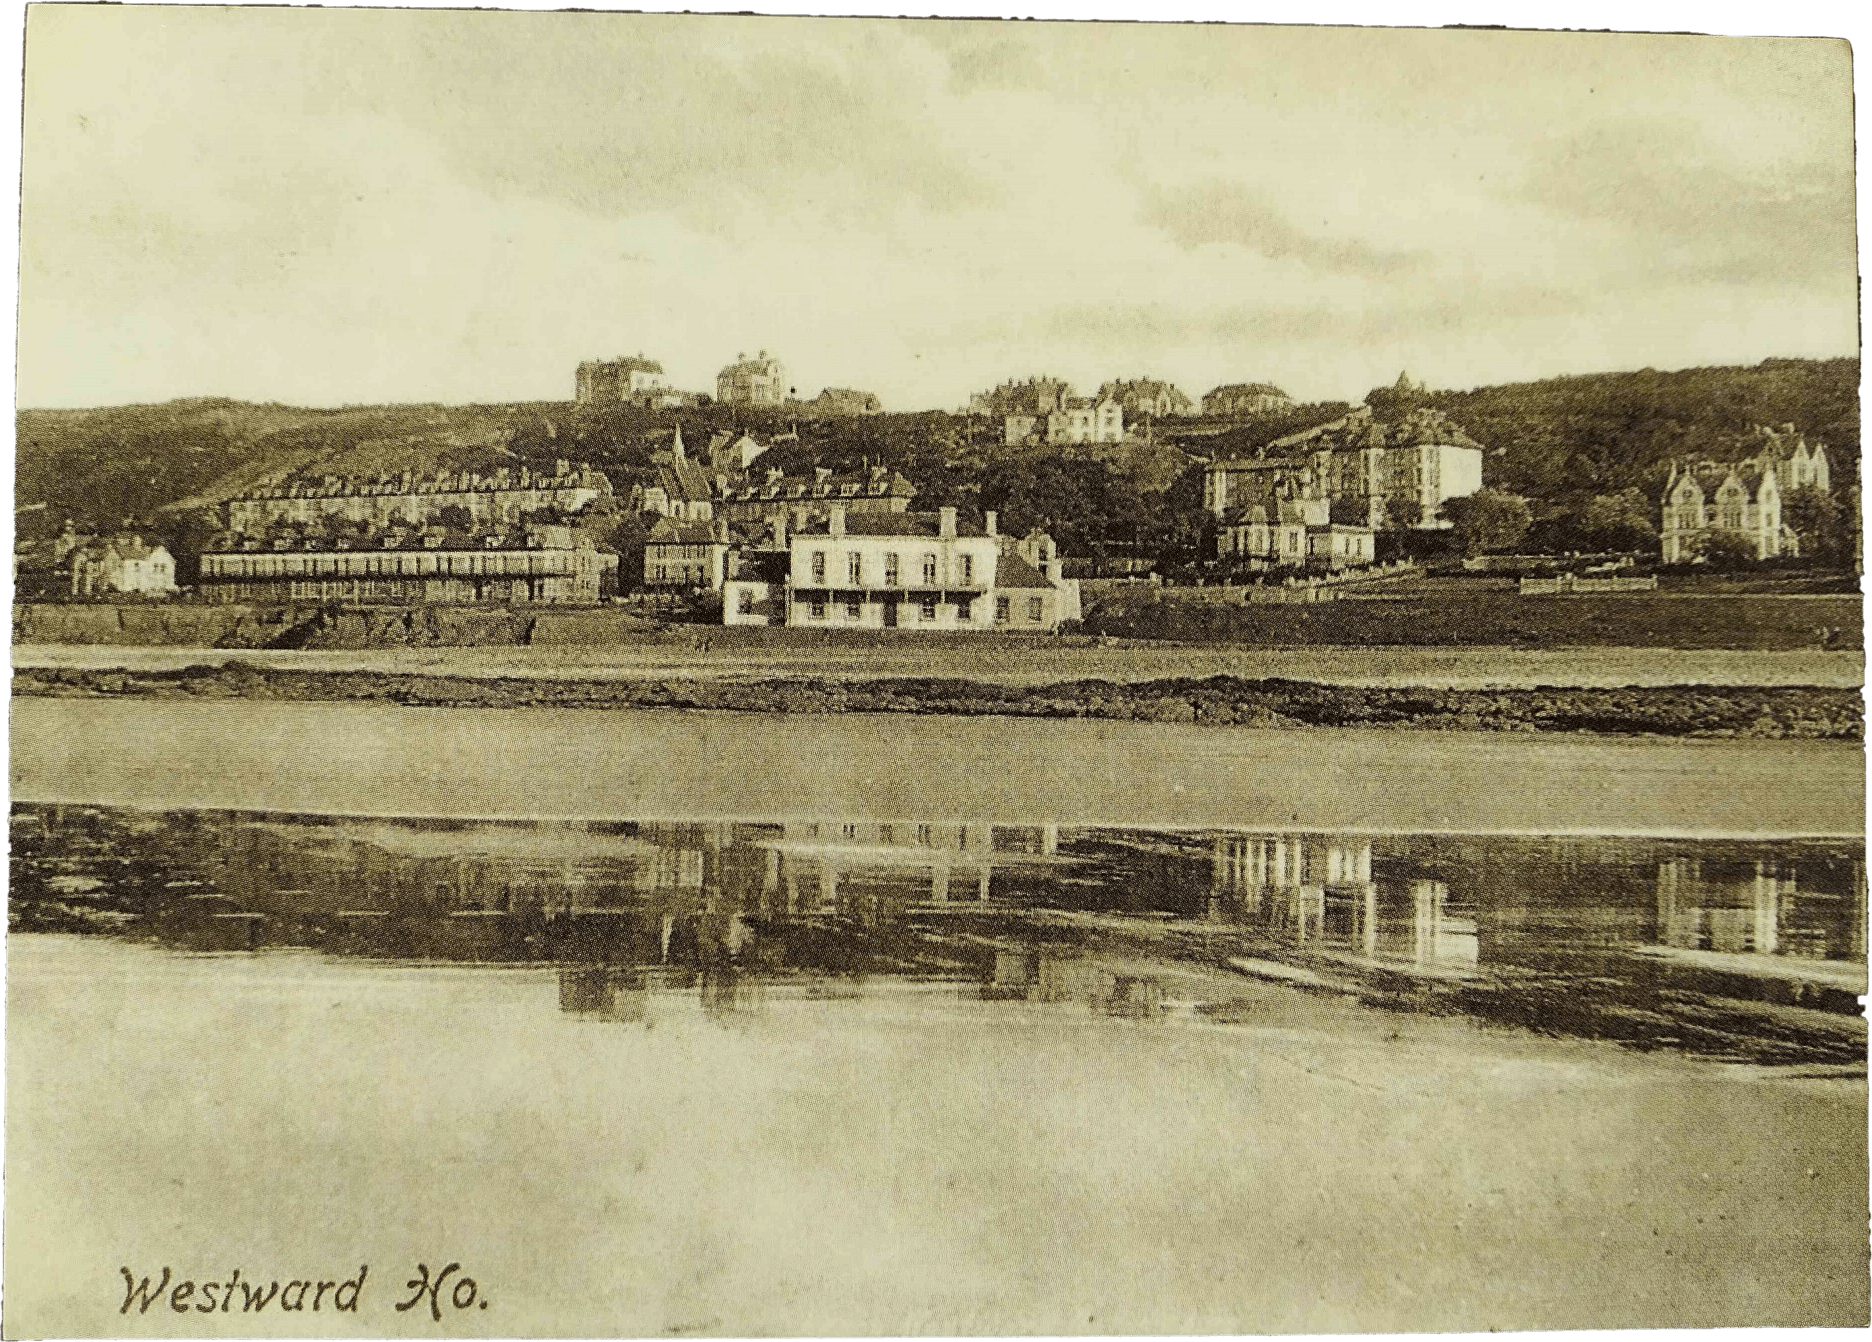 An old photograph of a seaside village